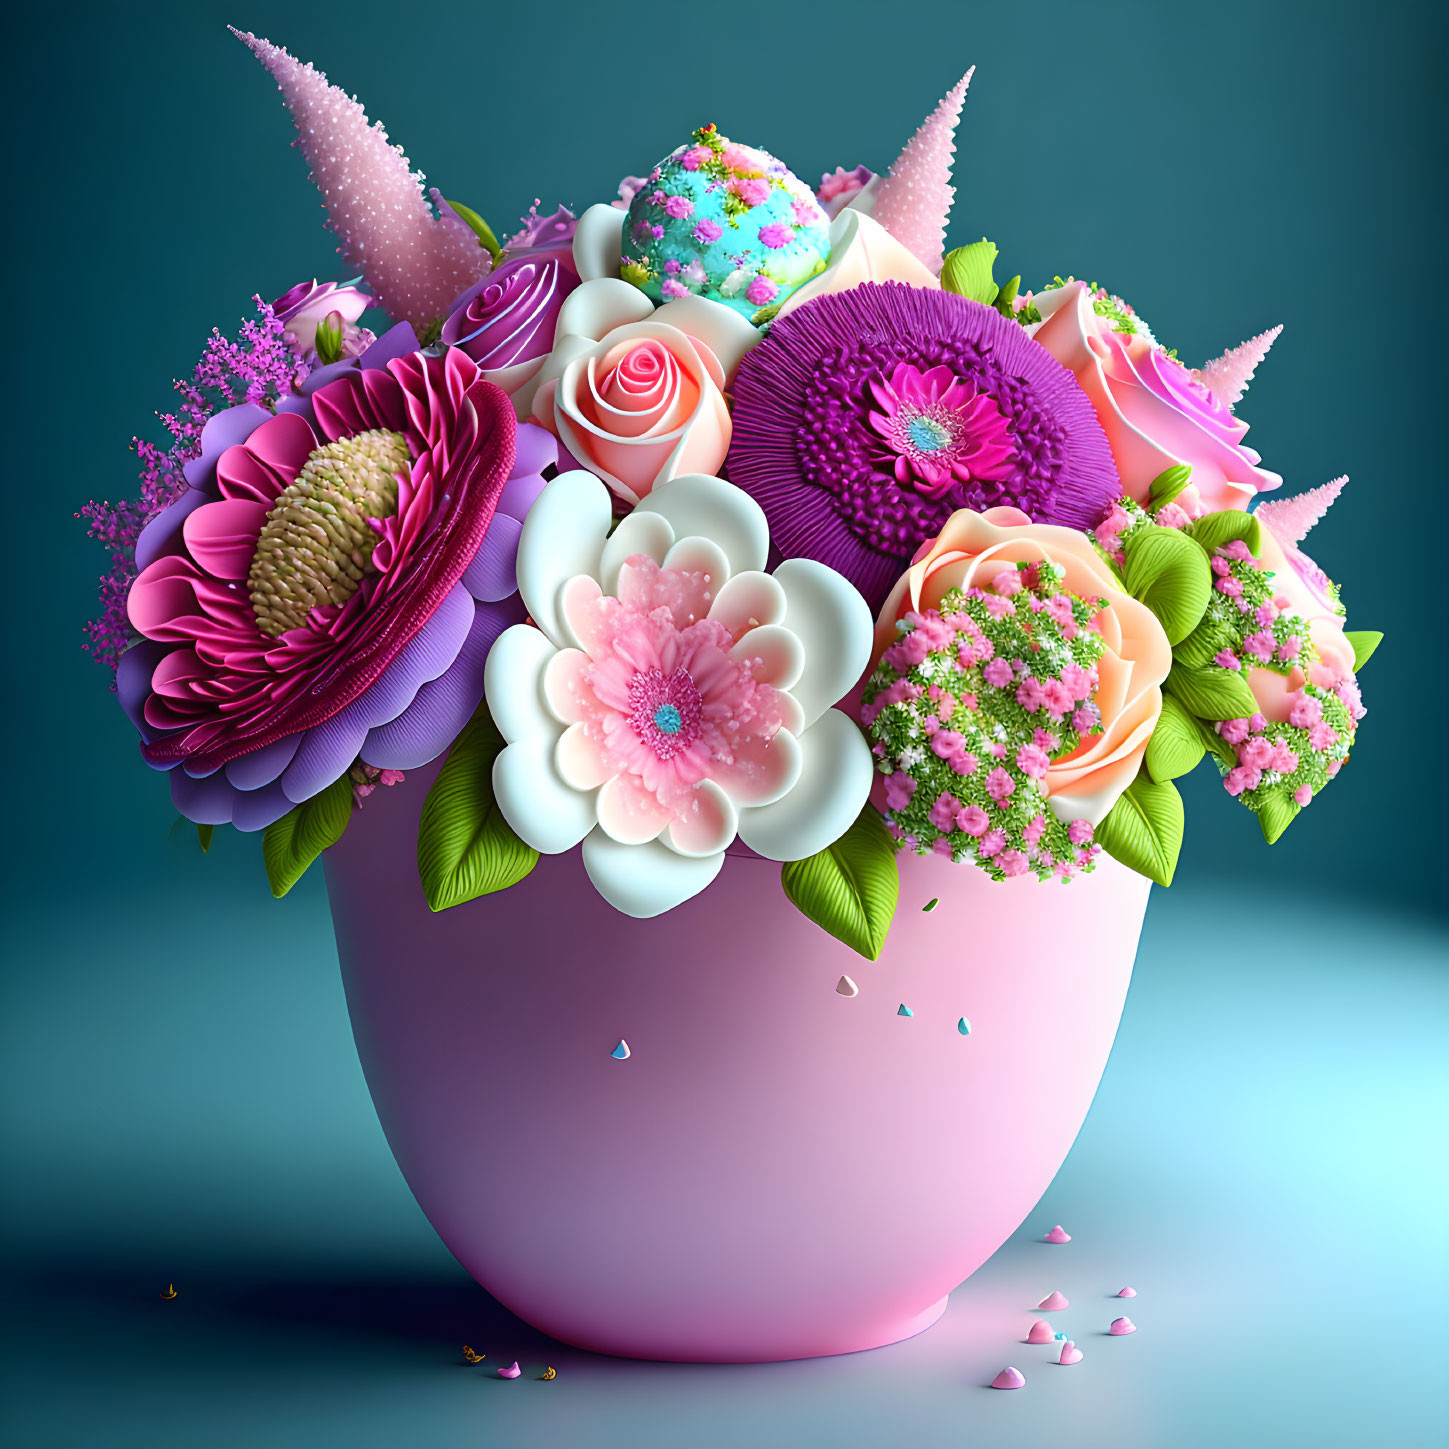 Colorful Digital Illustration of Pink, Purple, and Green Bouquet in Pink Vase